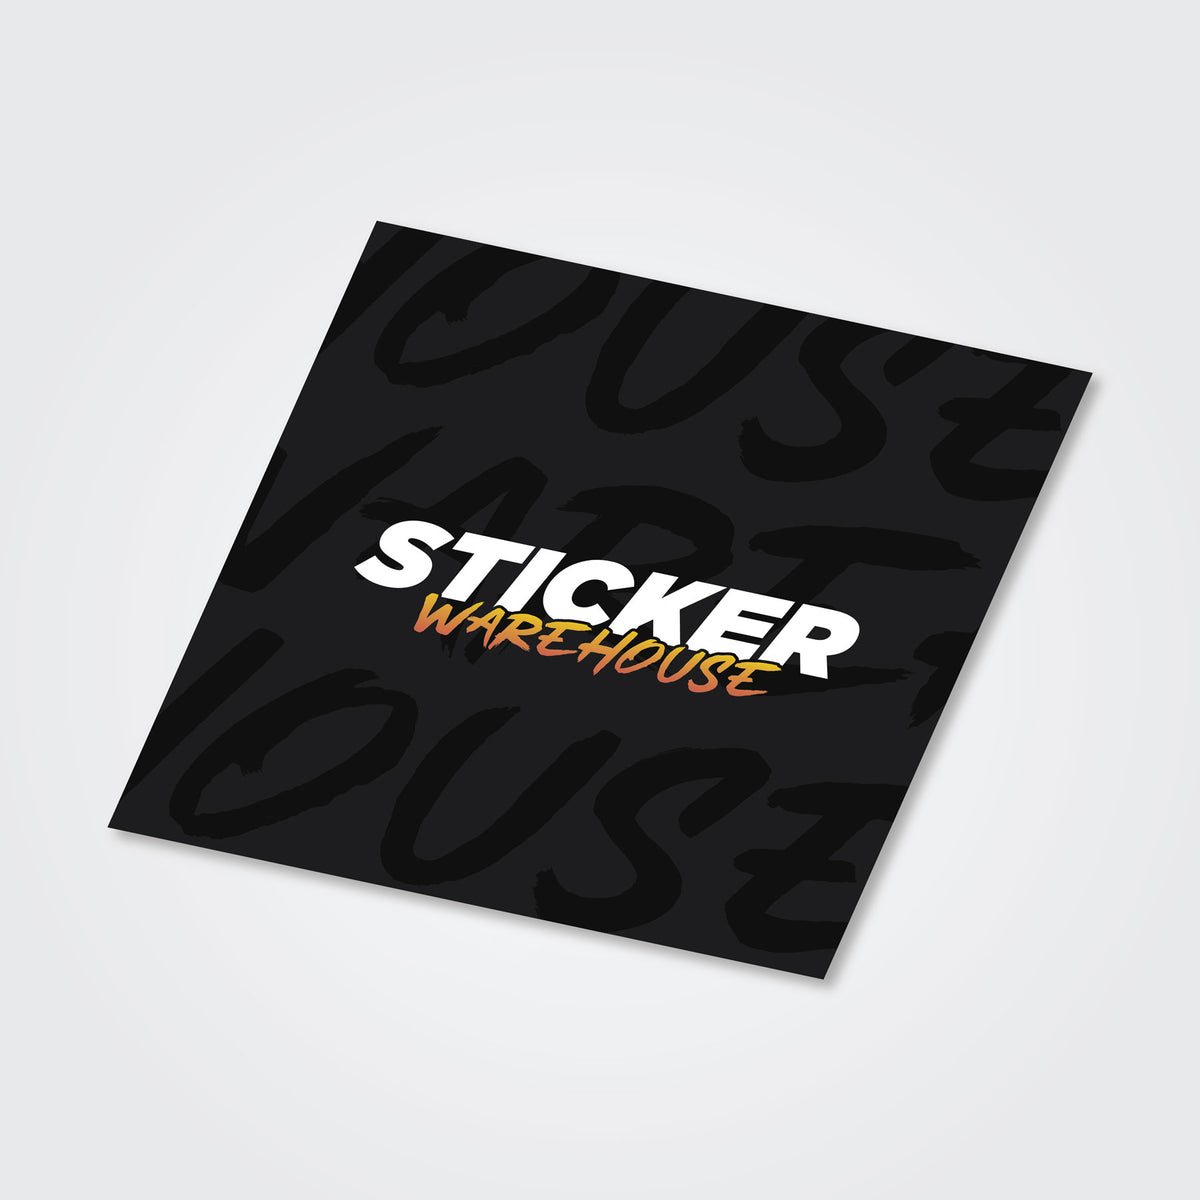 Highest Quality Stickers Available